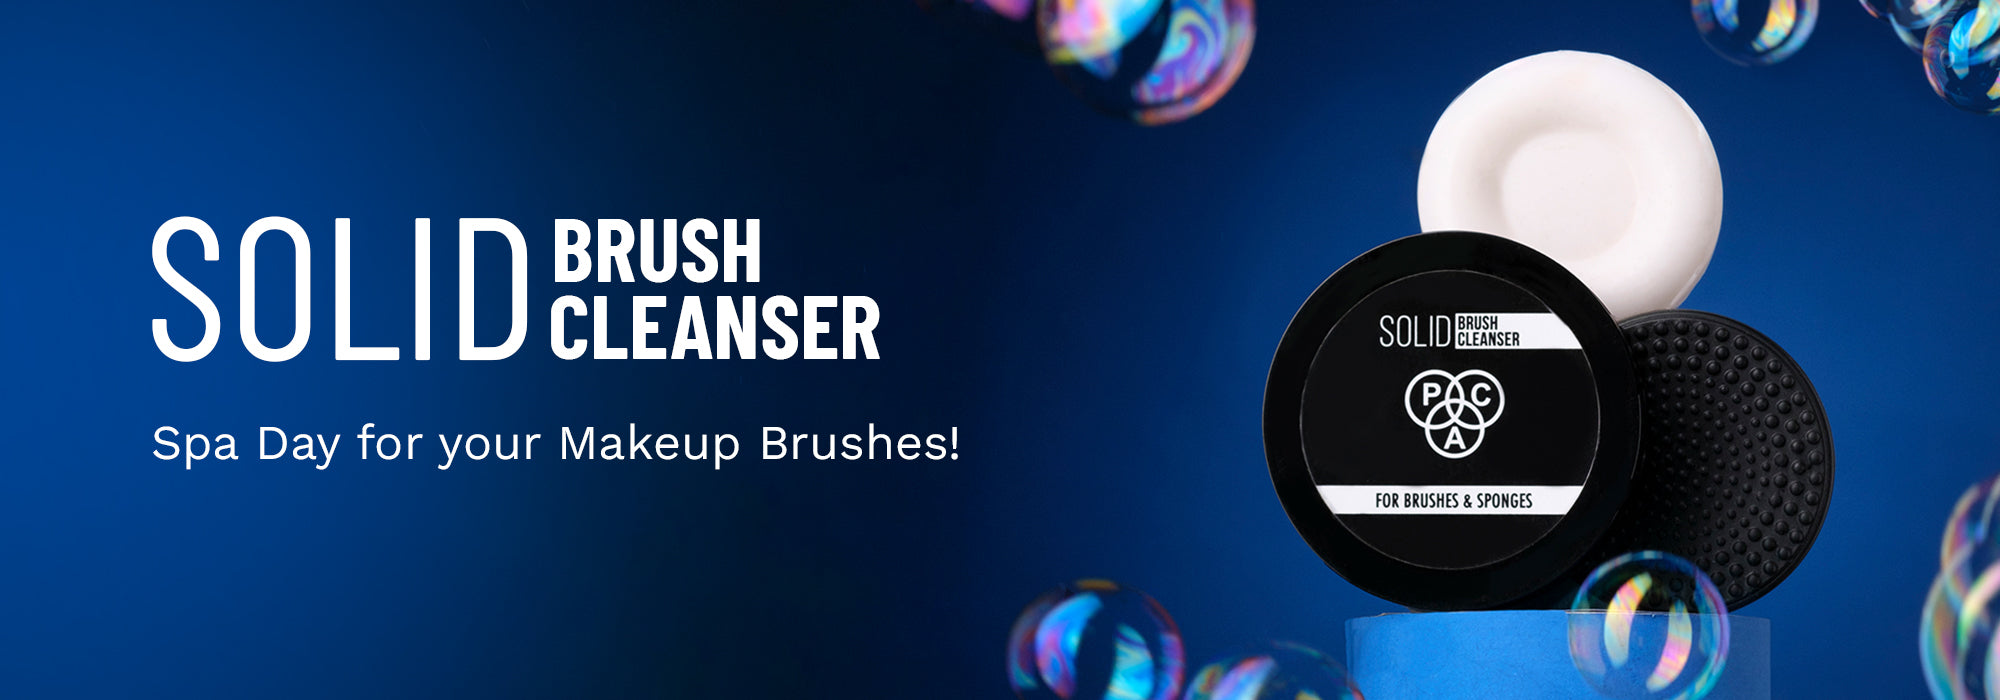 Brush Cleansers